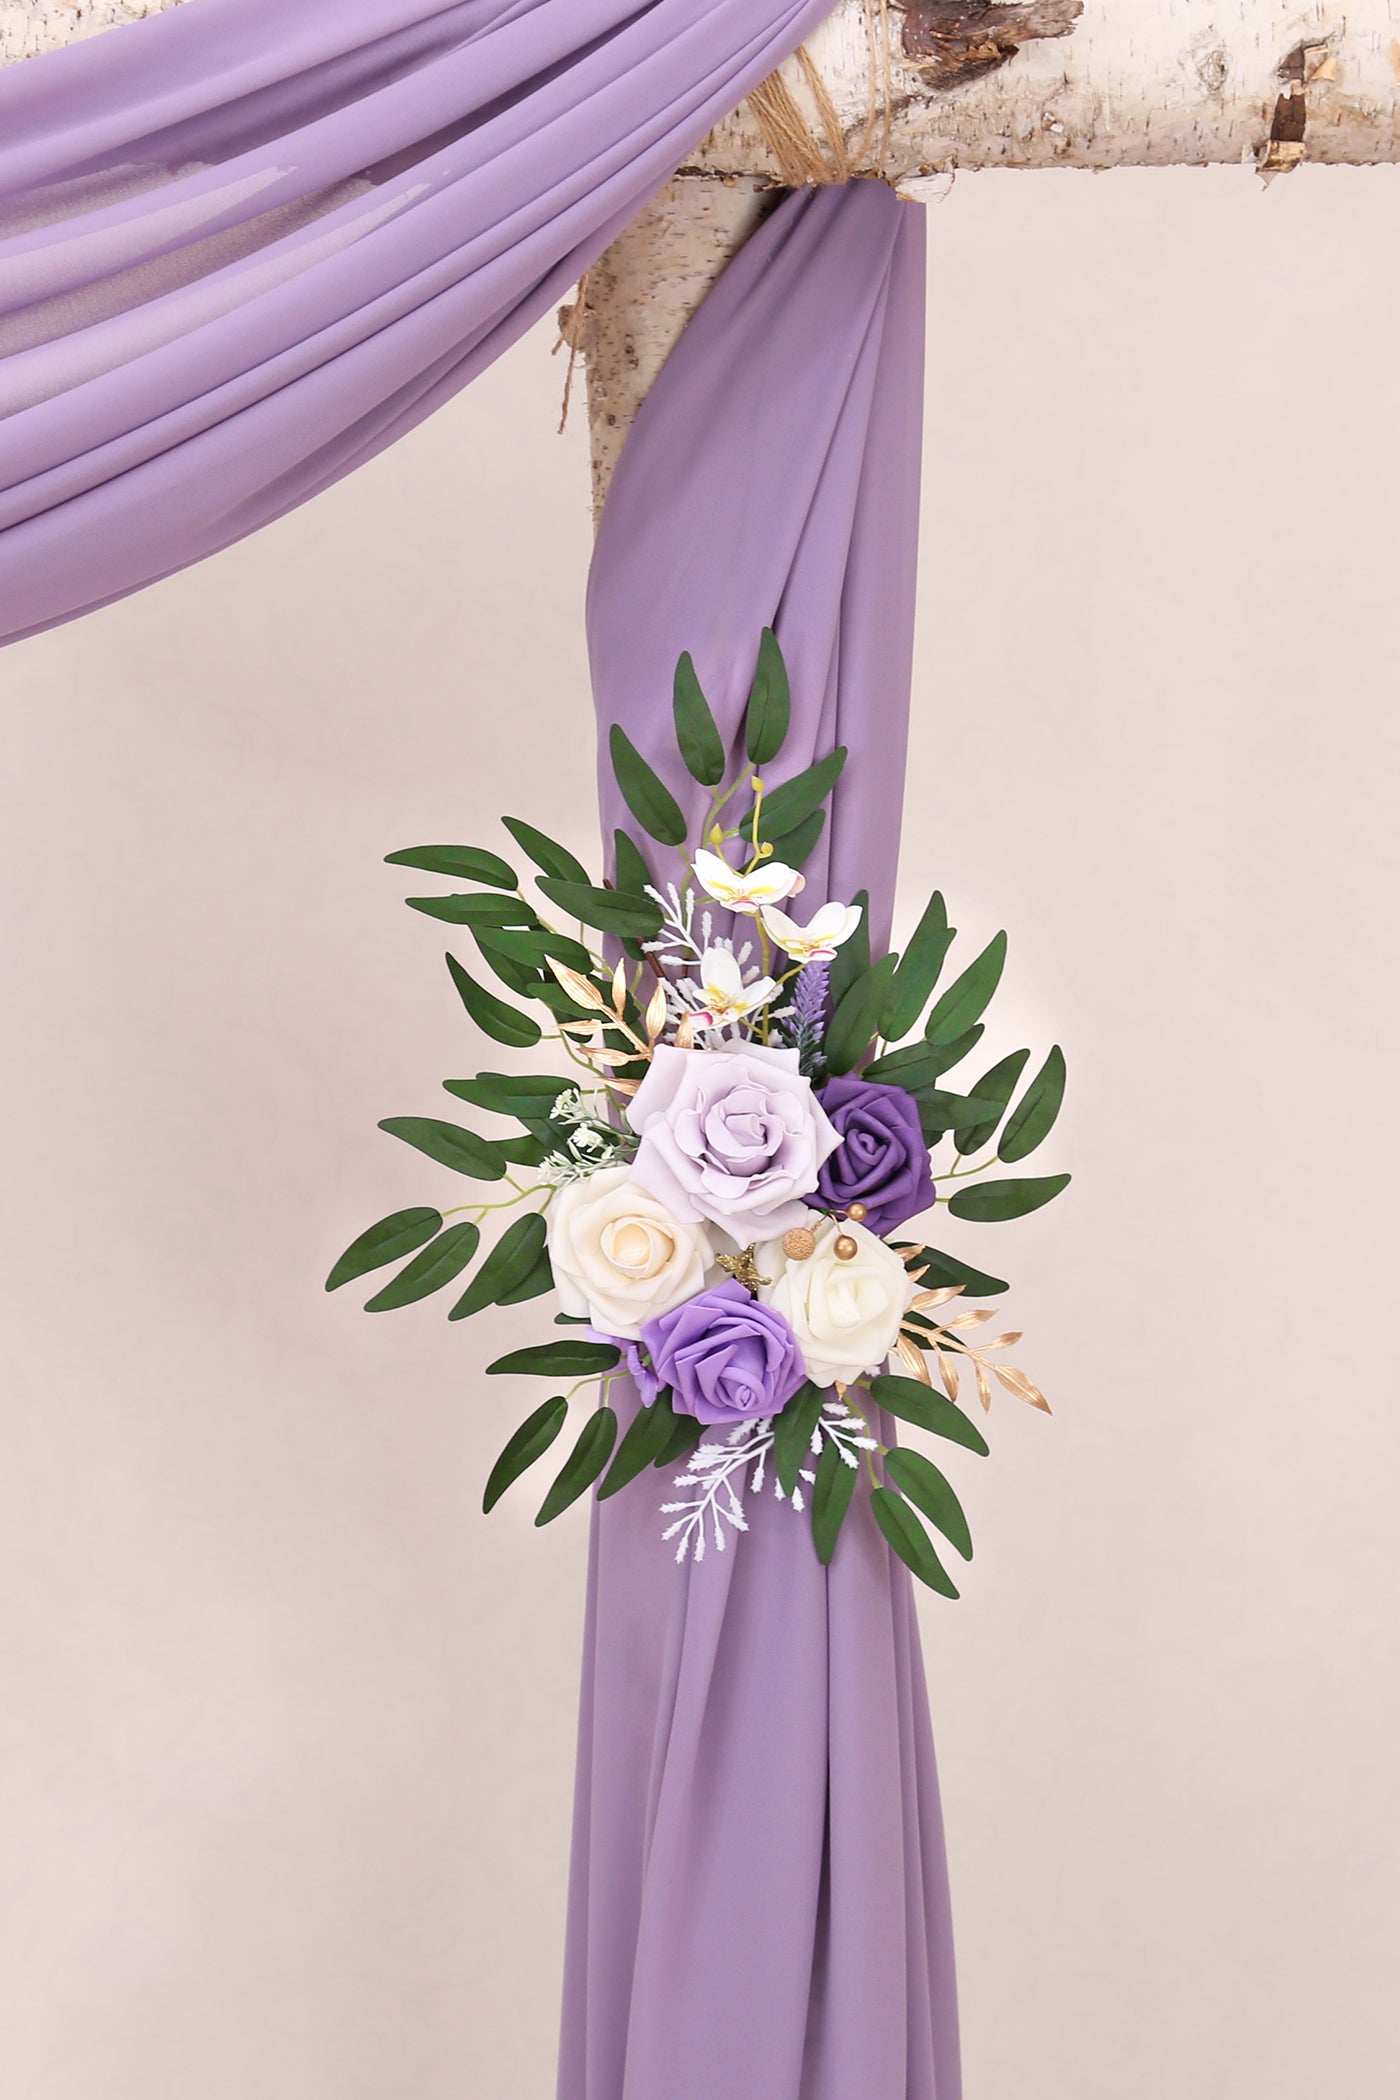 DORIS HOME Artificial Flower Swag Purple and Cream for Wedding Ceremony Sign Floral Decoration - Pack of 2